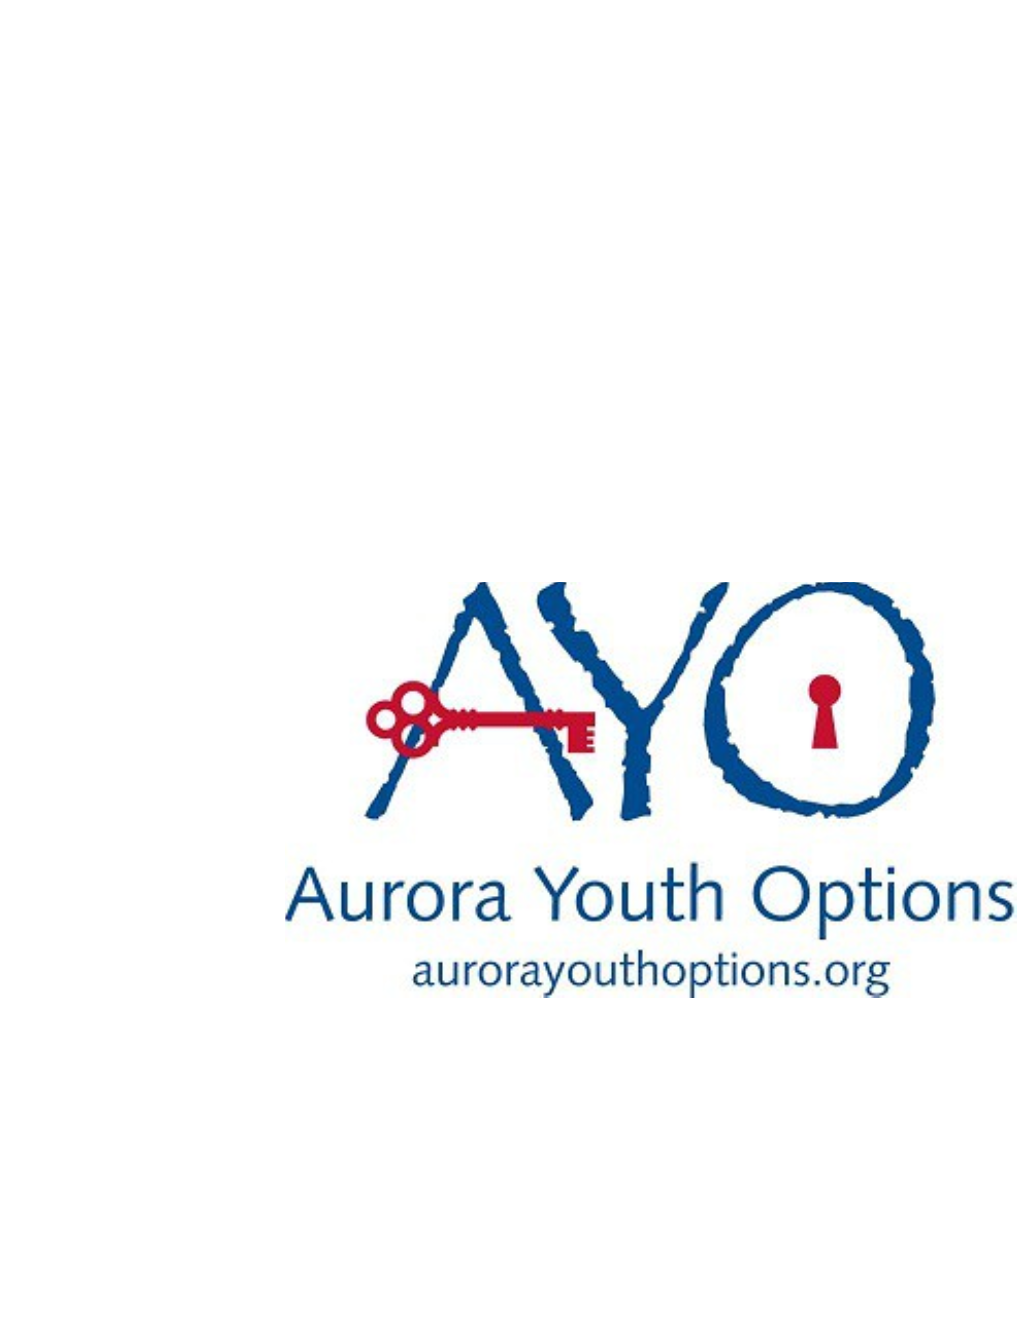 Aurora Youth Options Annual Report